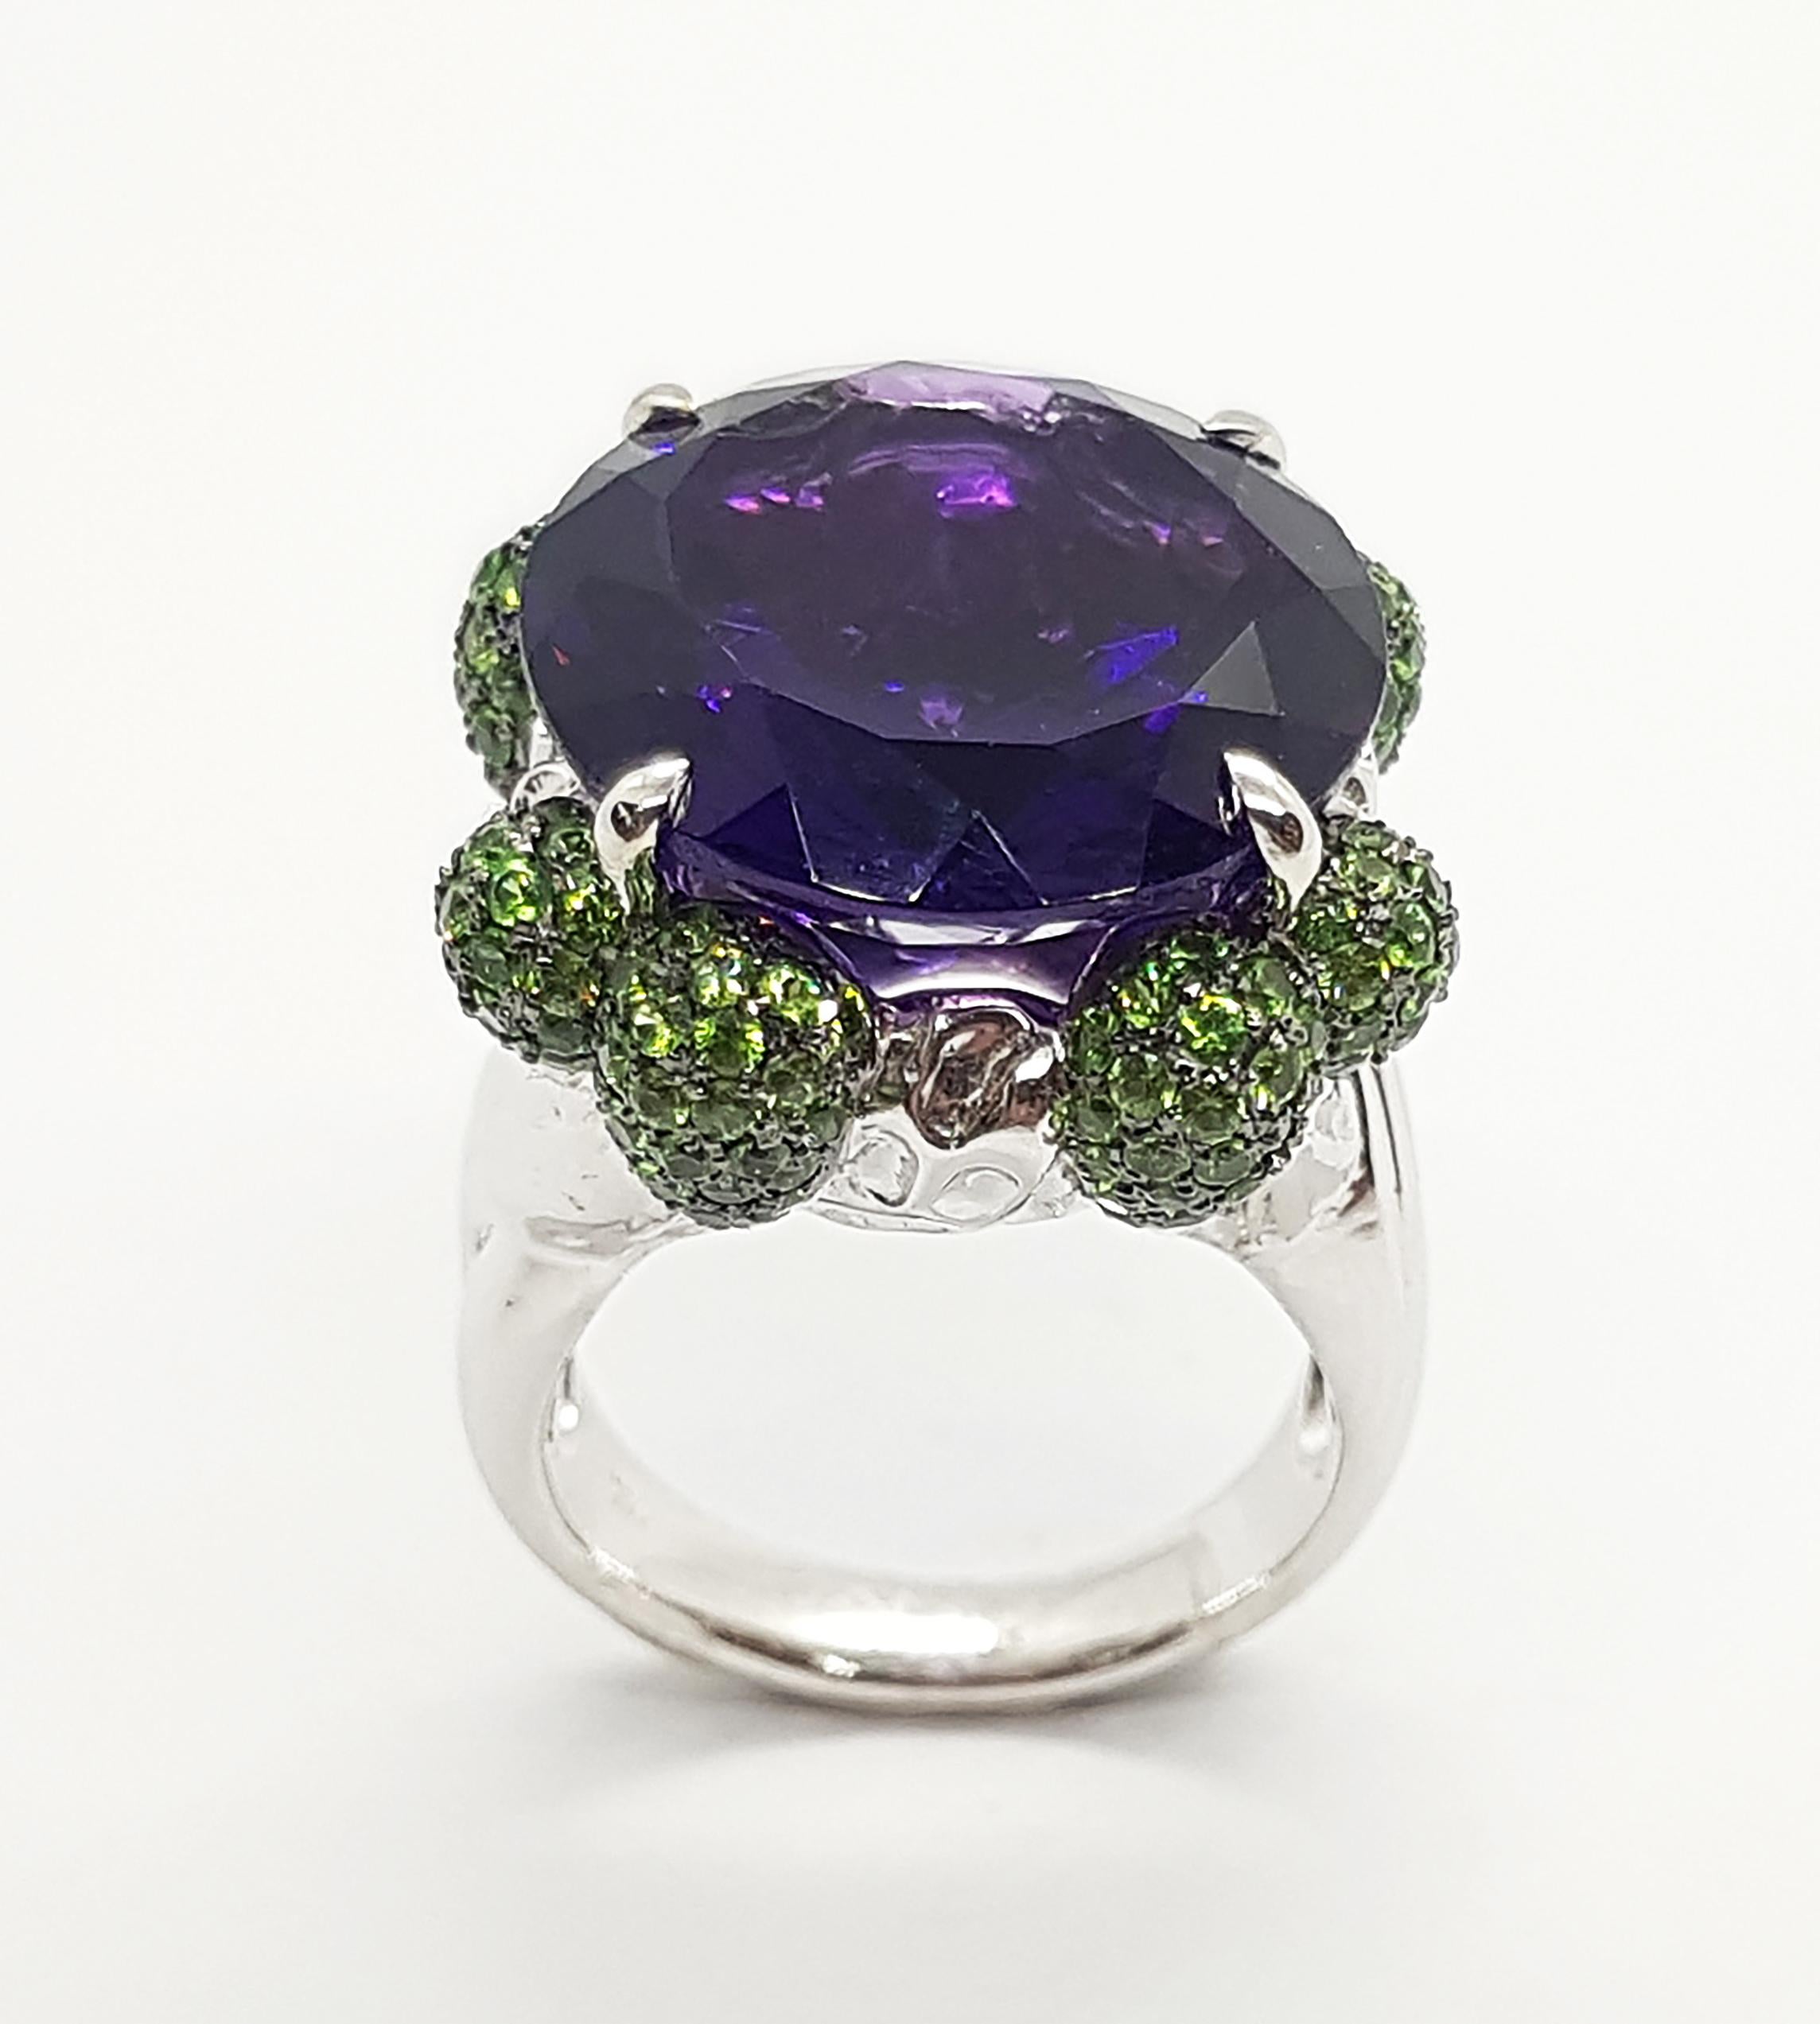 Amethyst 13.23 carats with Tsavorite 1.87 carats Ring set in 18 Karat White Gold Settings 

Width:  2.0 cm 
Length:  2.0 cm
Ring Size: 51
Total Weight: 17.72 grams

